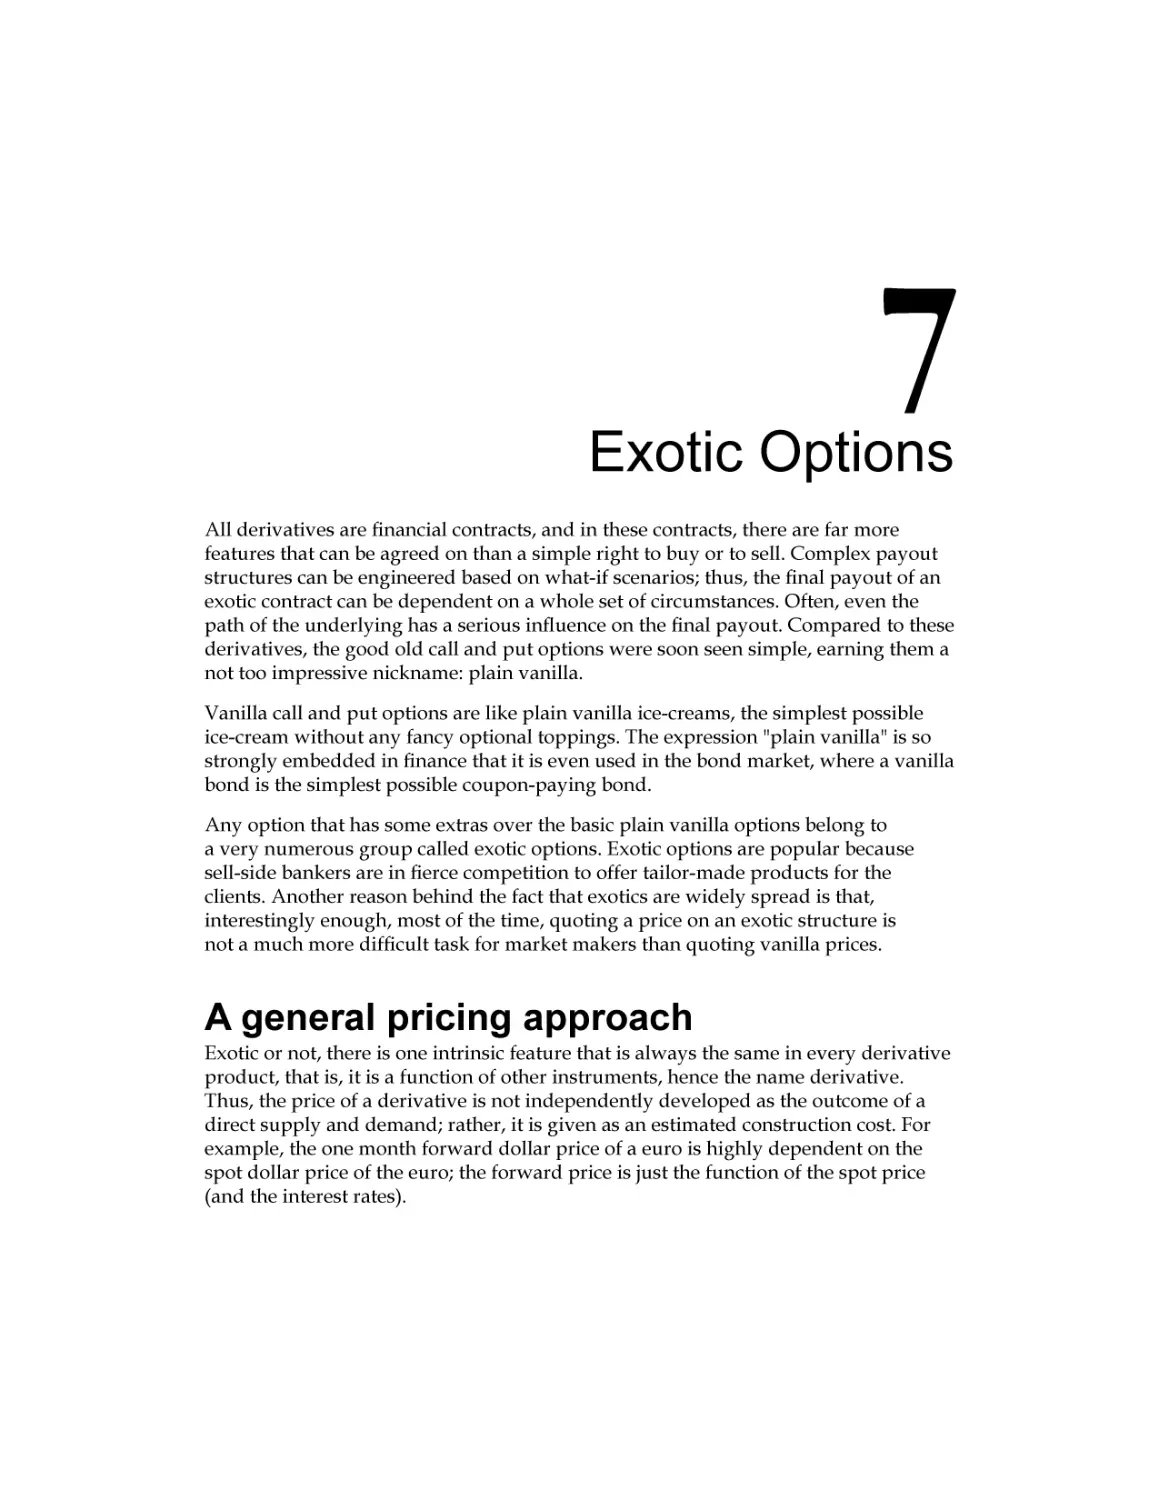 Chapter 7
A general pricing approach